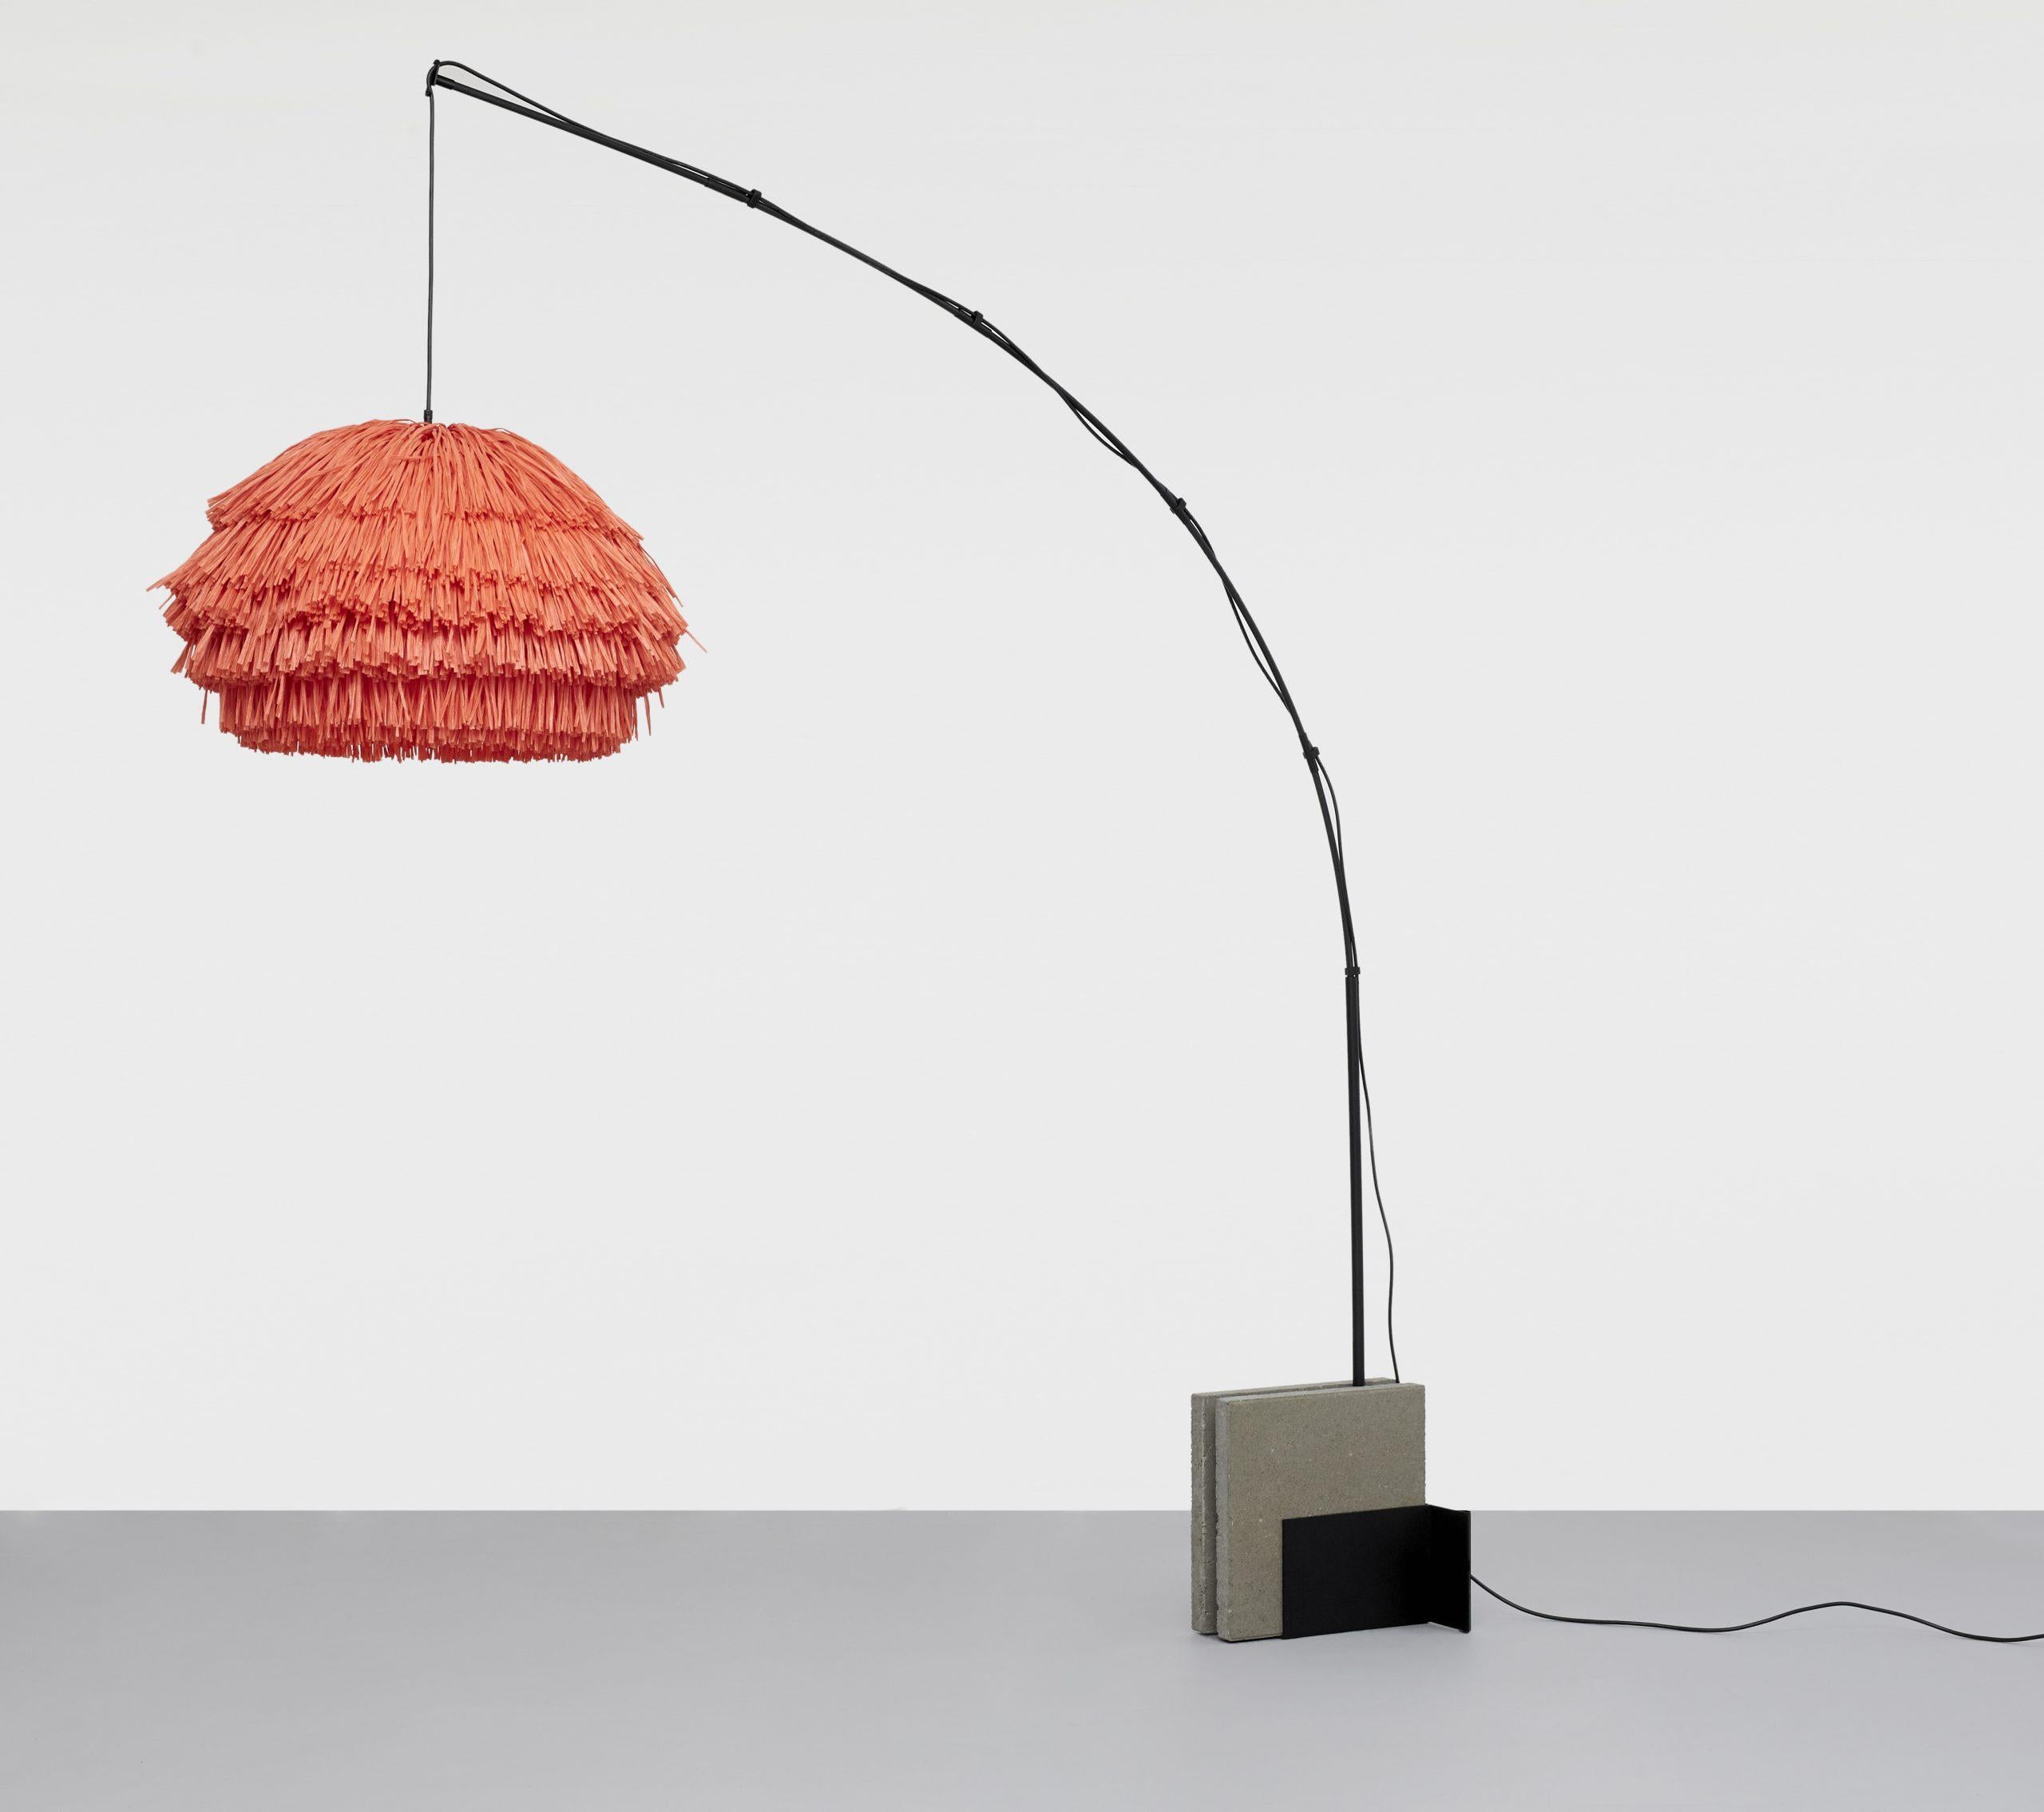 Coral Fran CS stand floor lamp by Llot Llov
Handcrafted light object
Dimensions: D 65 x W 205.8 x H 250 cm
Materials: raffia fringes, glass fiber, steel, concrete
Colour: coral
Also available in green, beige, black.

Another member of the